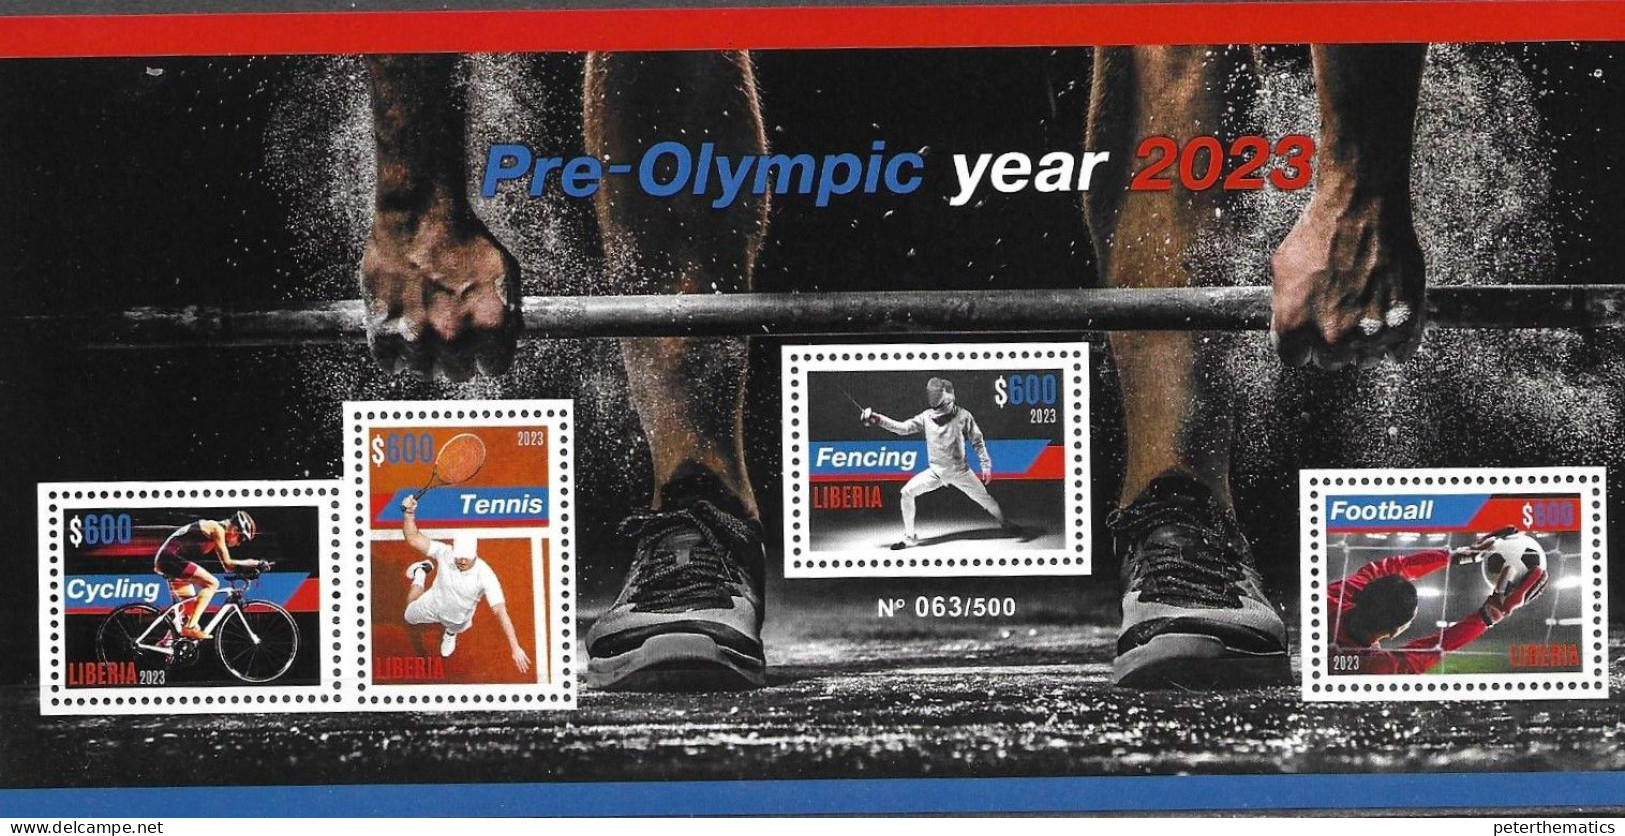 LIBERIA, 2023, MNH, PREOLYMPIC ISSUE, PARIS OLYMPICS, FOOTBALL, CYCLING, TENNIS, FENCING, LIMITED NUMBERED SLT, OFFICIAL - Eté 2024 : Paris